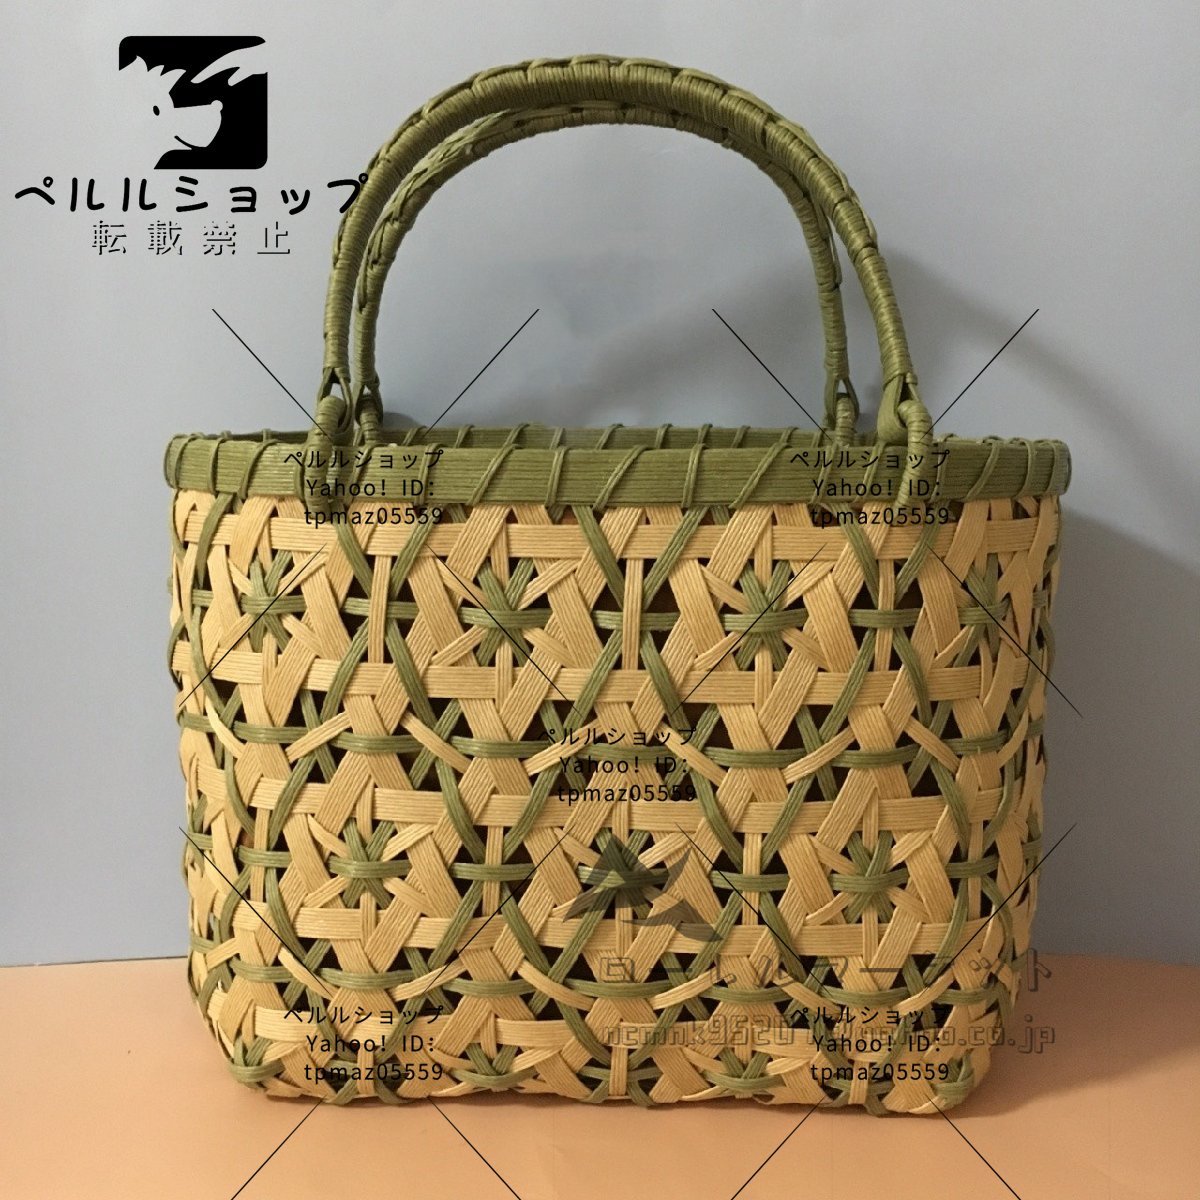  high quality don't miss it! finest quality quality worker handmade superior article basket bag hand-knitted . bag basket cane basket 